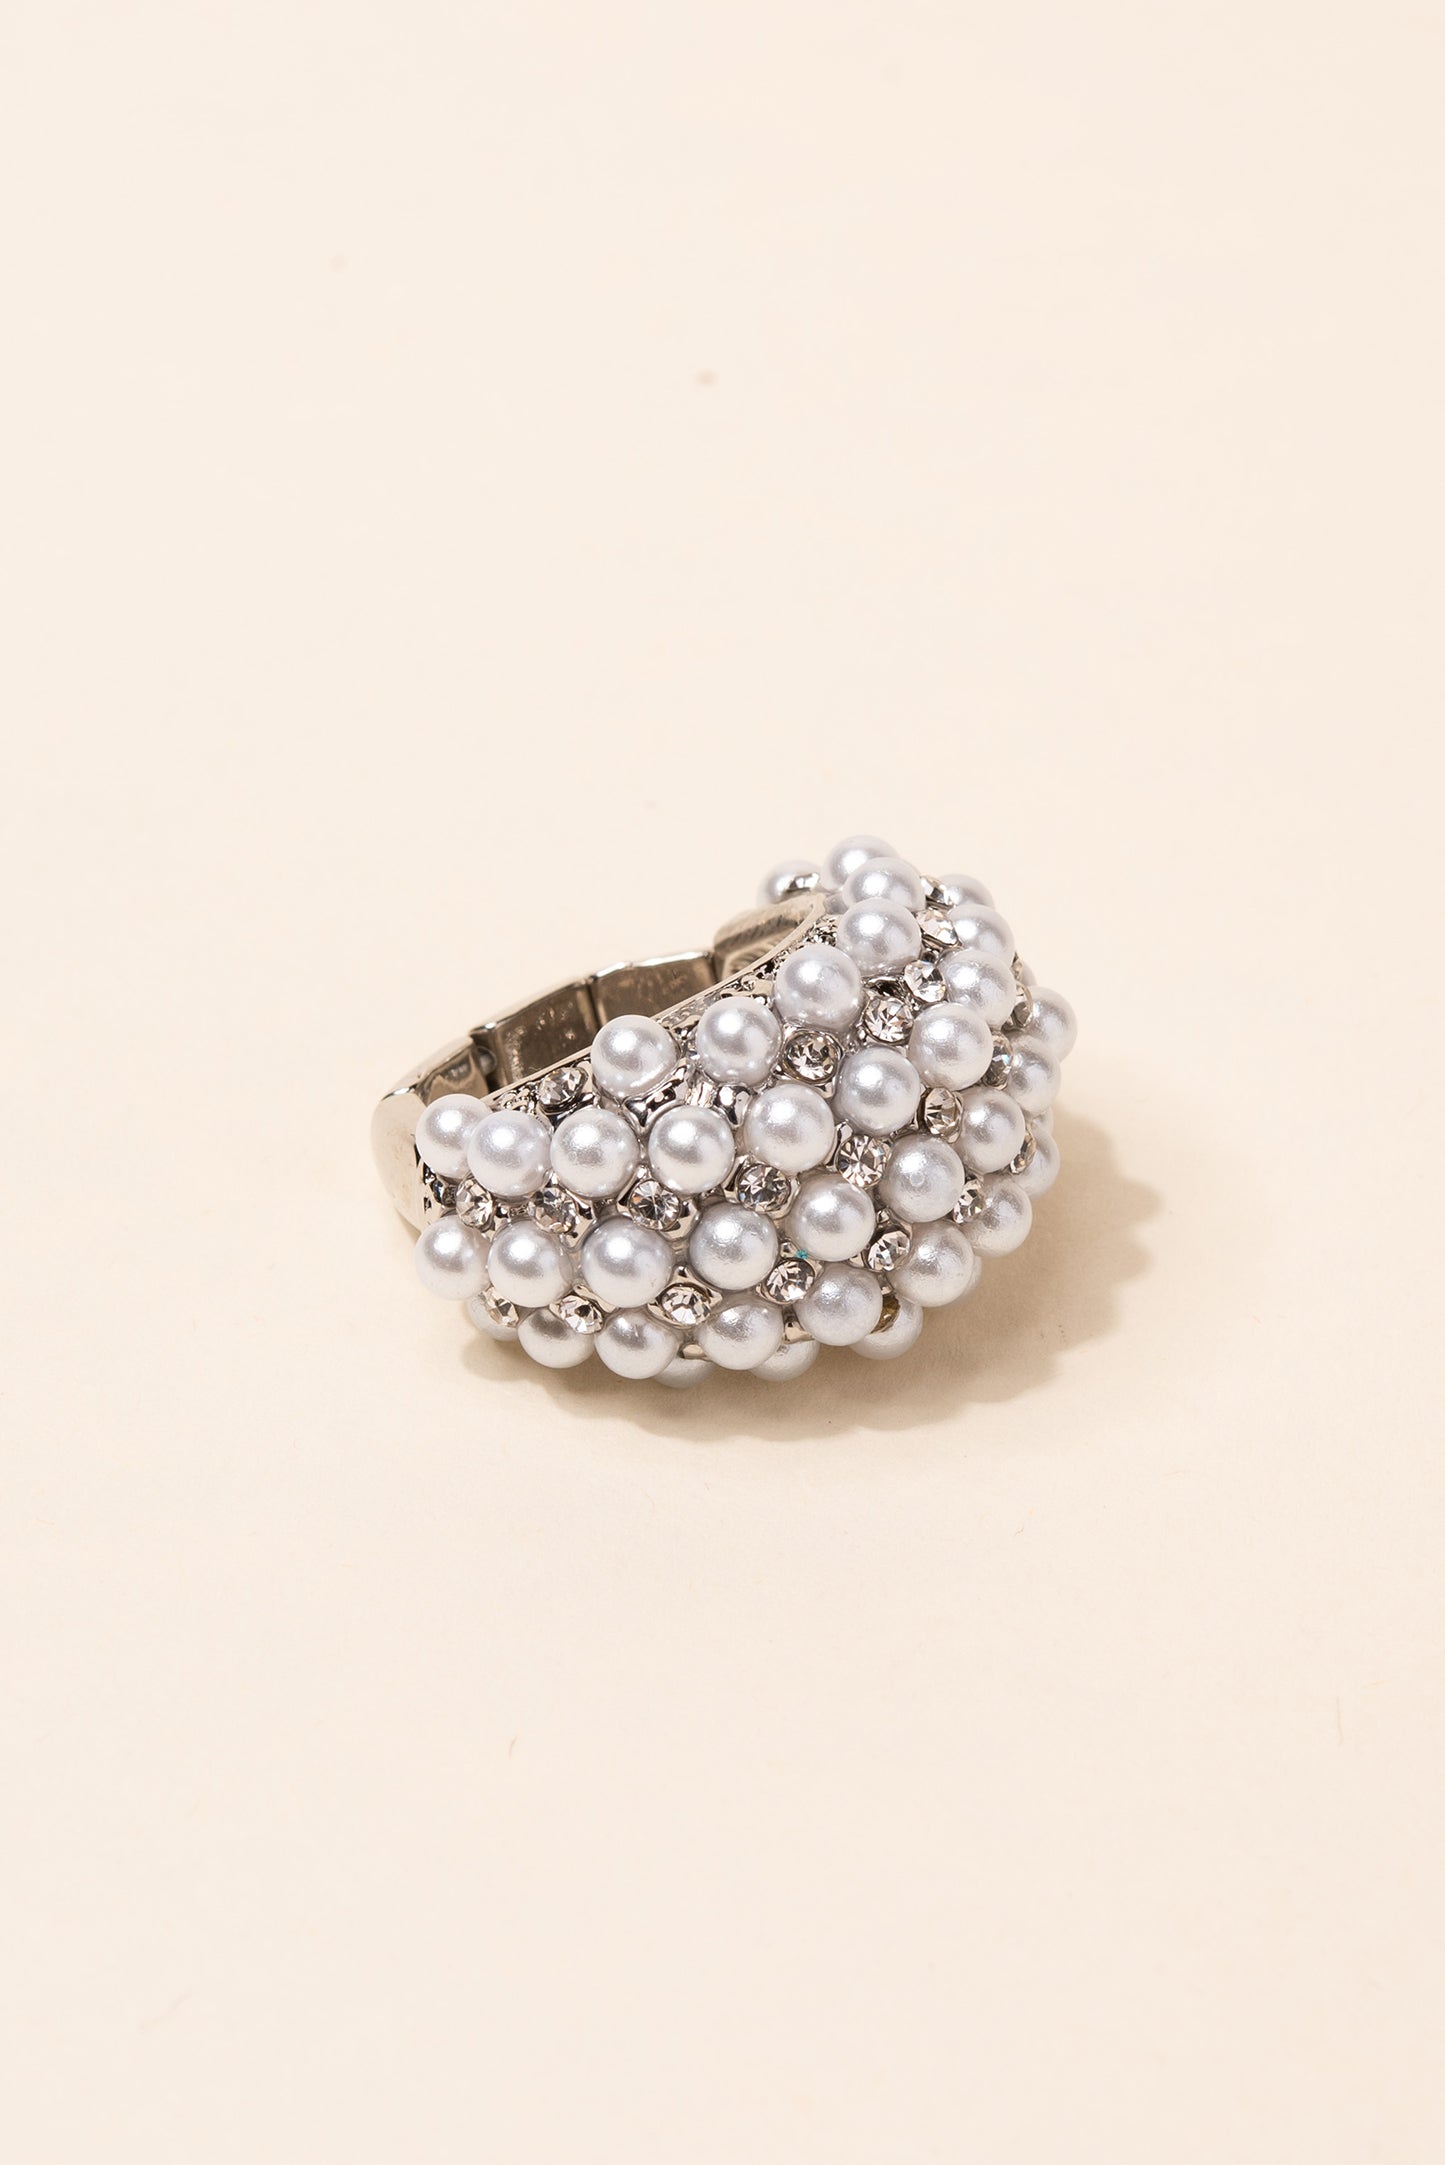 Paved Rhinestone and Pearl Bead Ring - Silver